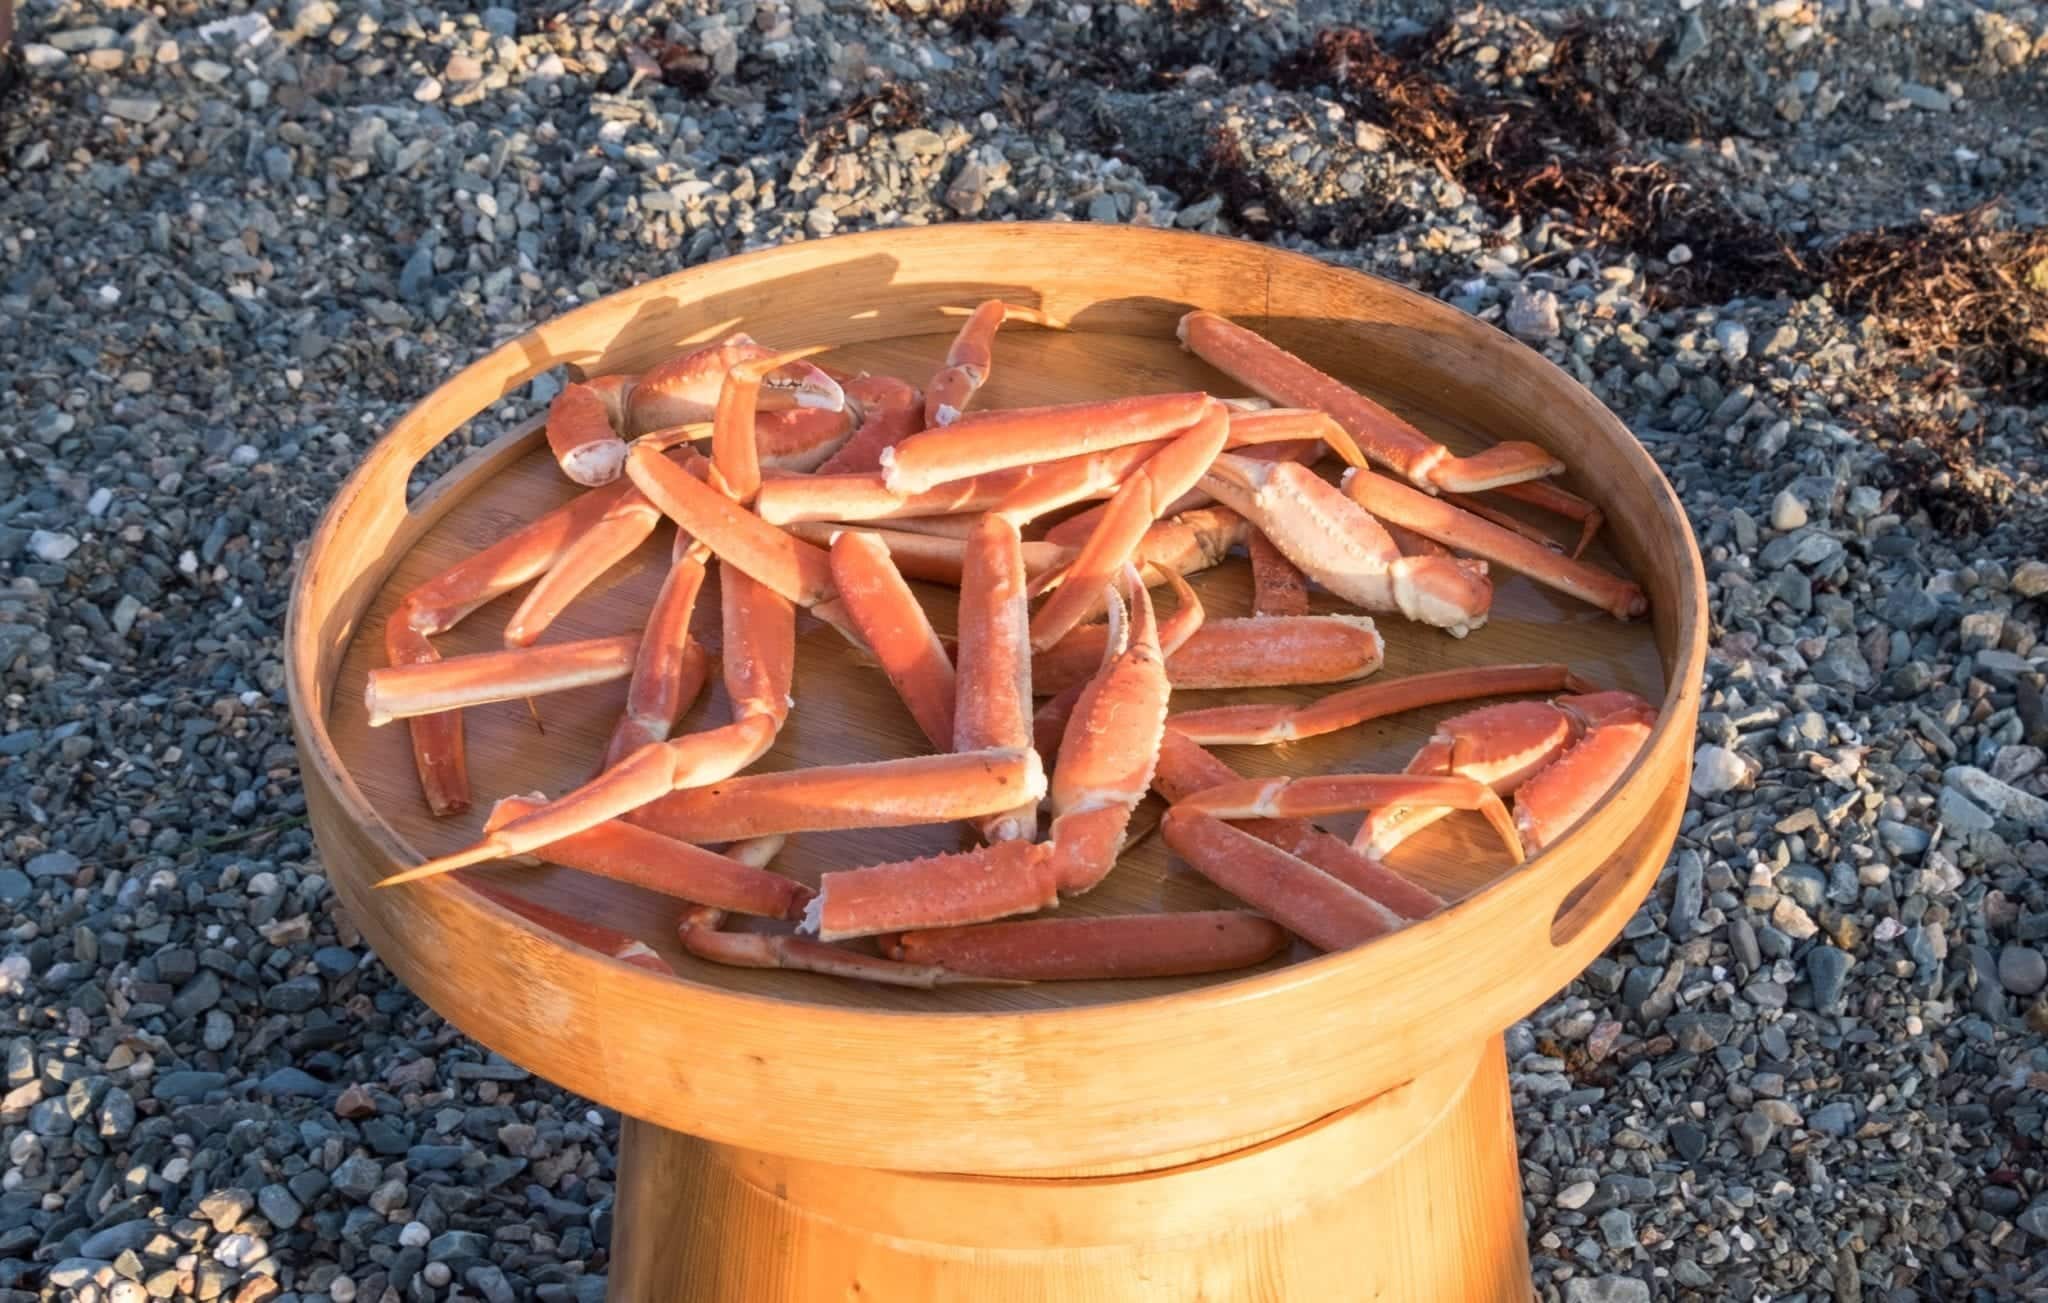 Crab legs, cooked and on a wooden serving platter on the beach.